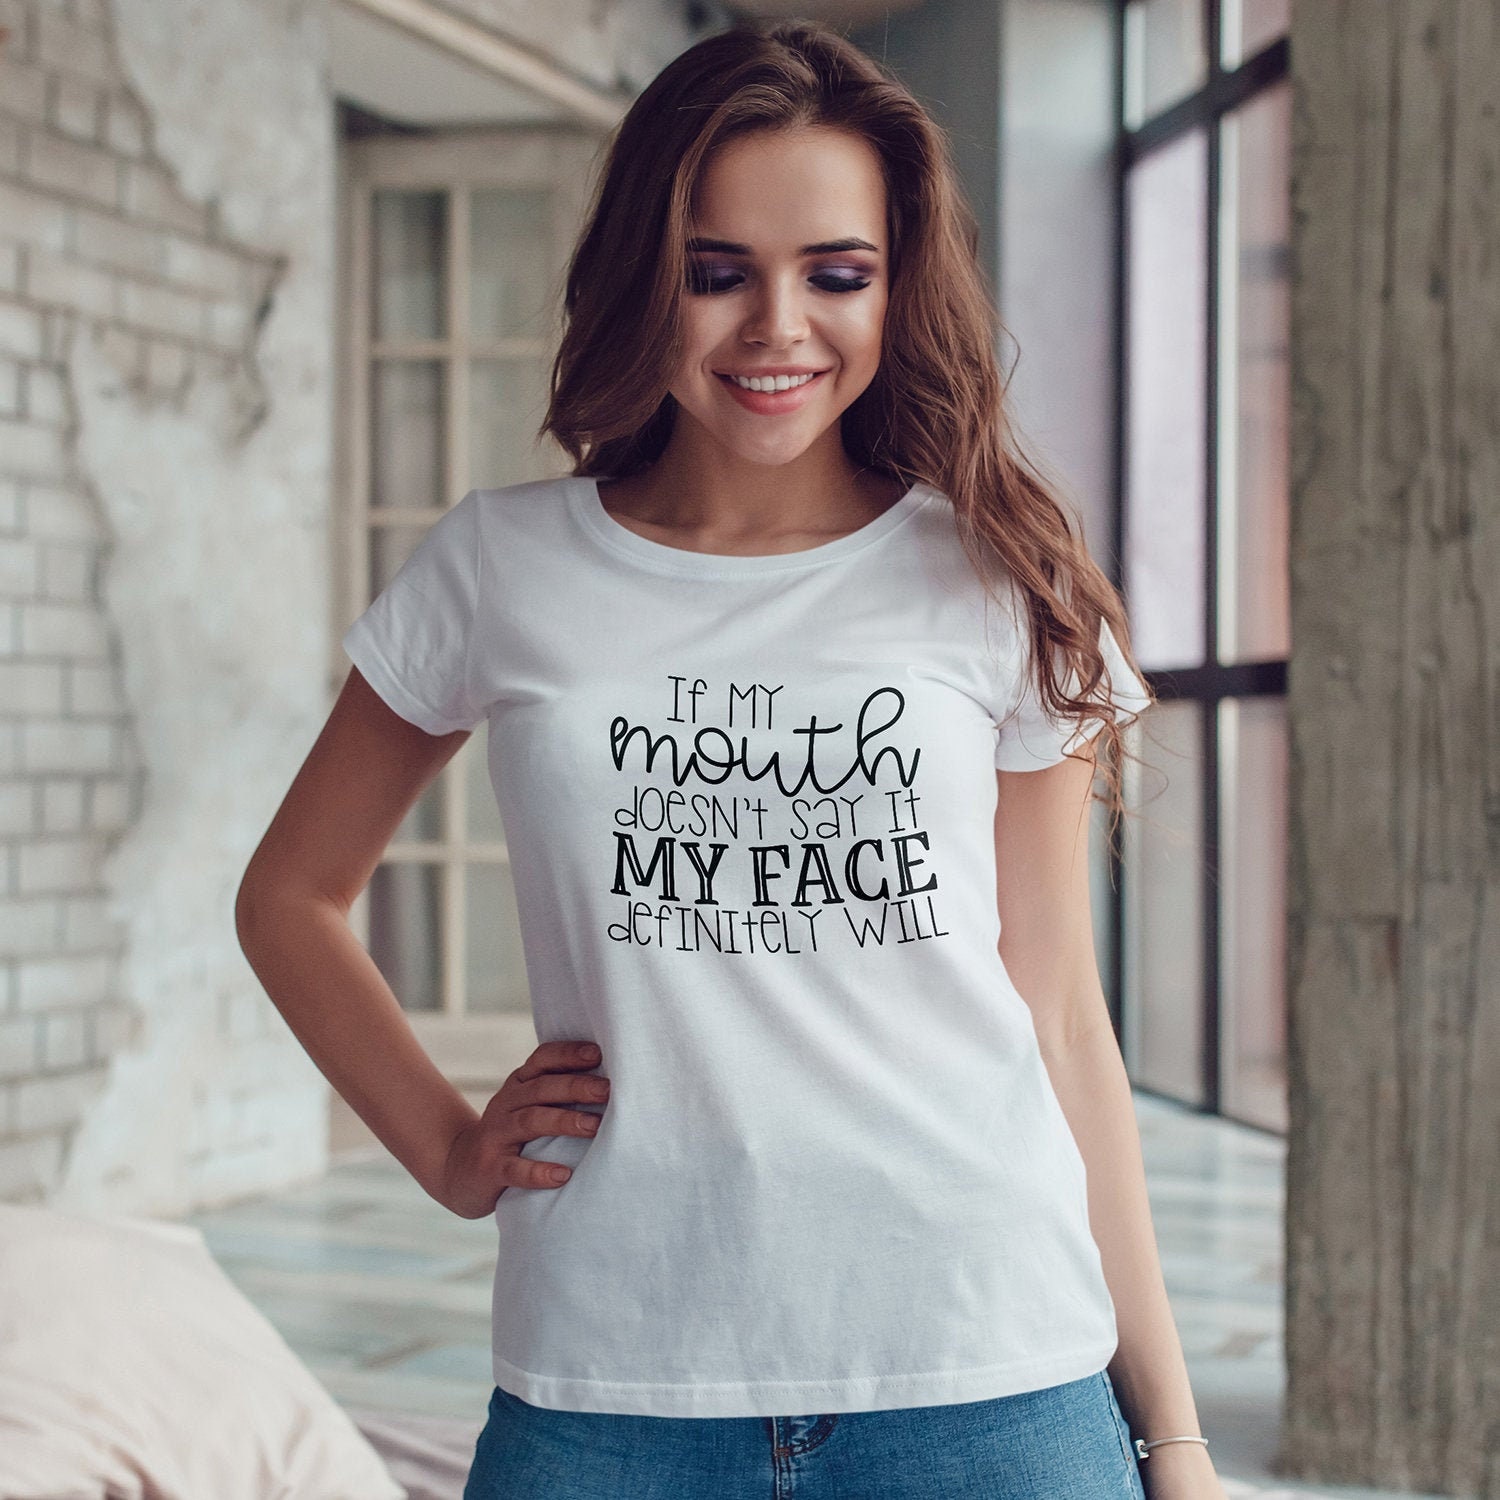 Produktion internettet Faciliteter Funny Tshirt Woman T-shirt Woman Top Women Clothing Gift for - Etsy